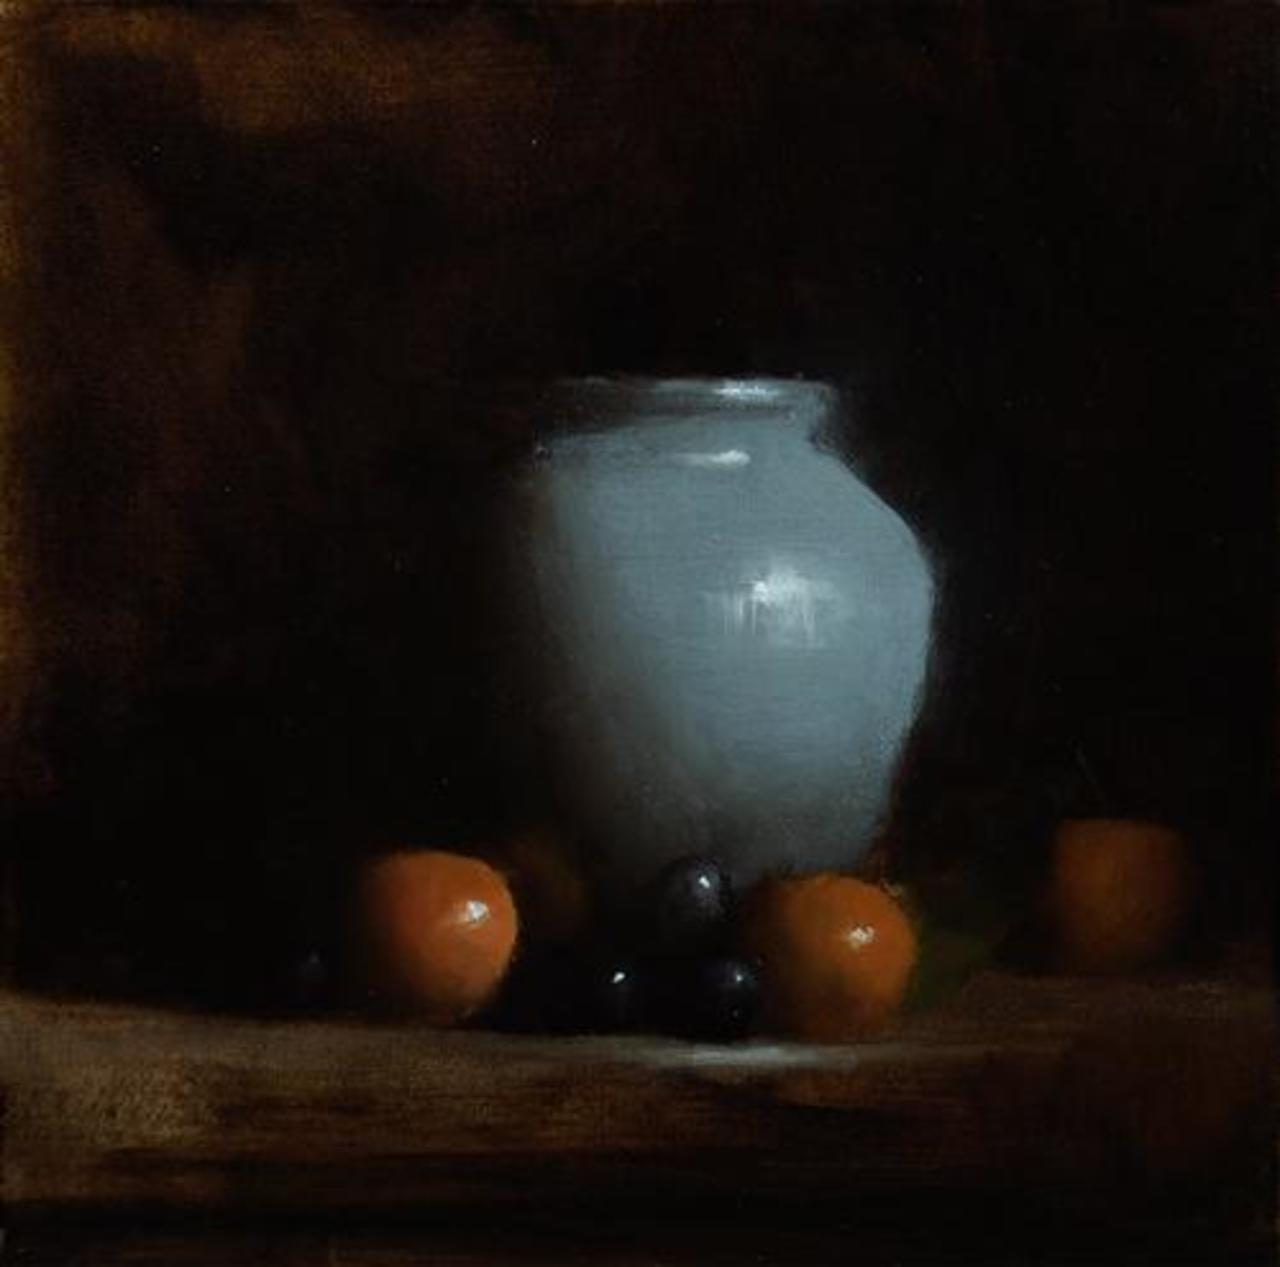 Vase with Clementines 8x8" #painting #art #stilllife http://t.co/SheGgeyDq5